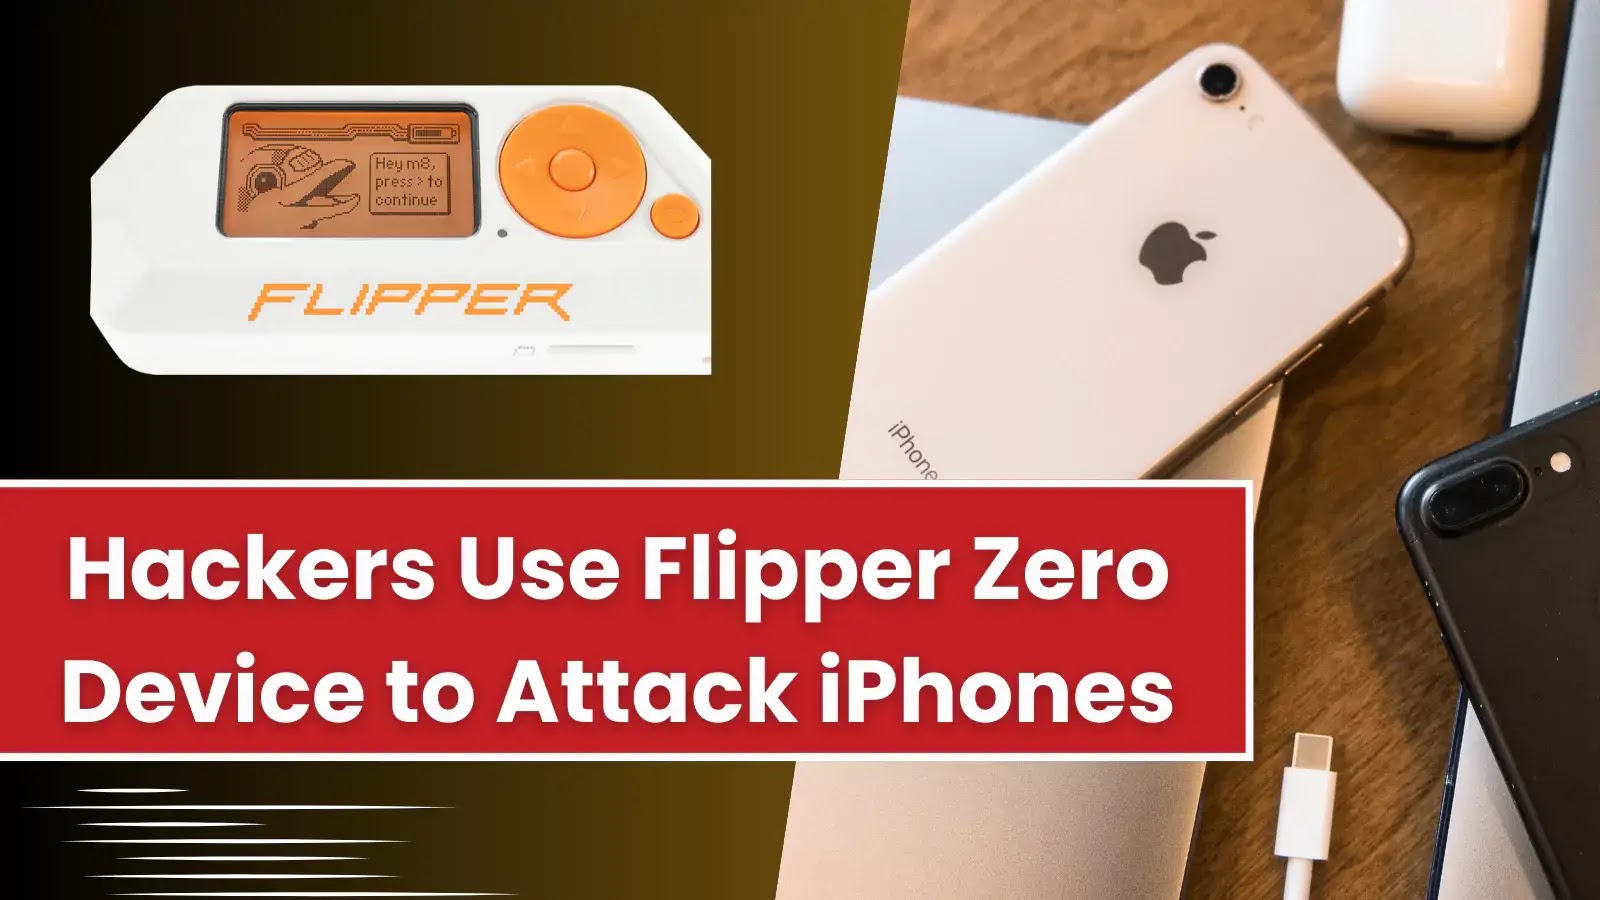 Hackers Use Flipper Device to Attack Nearby iPhone